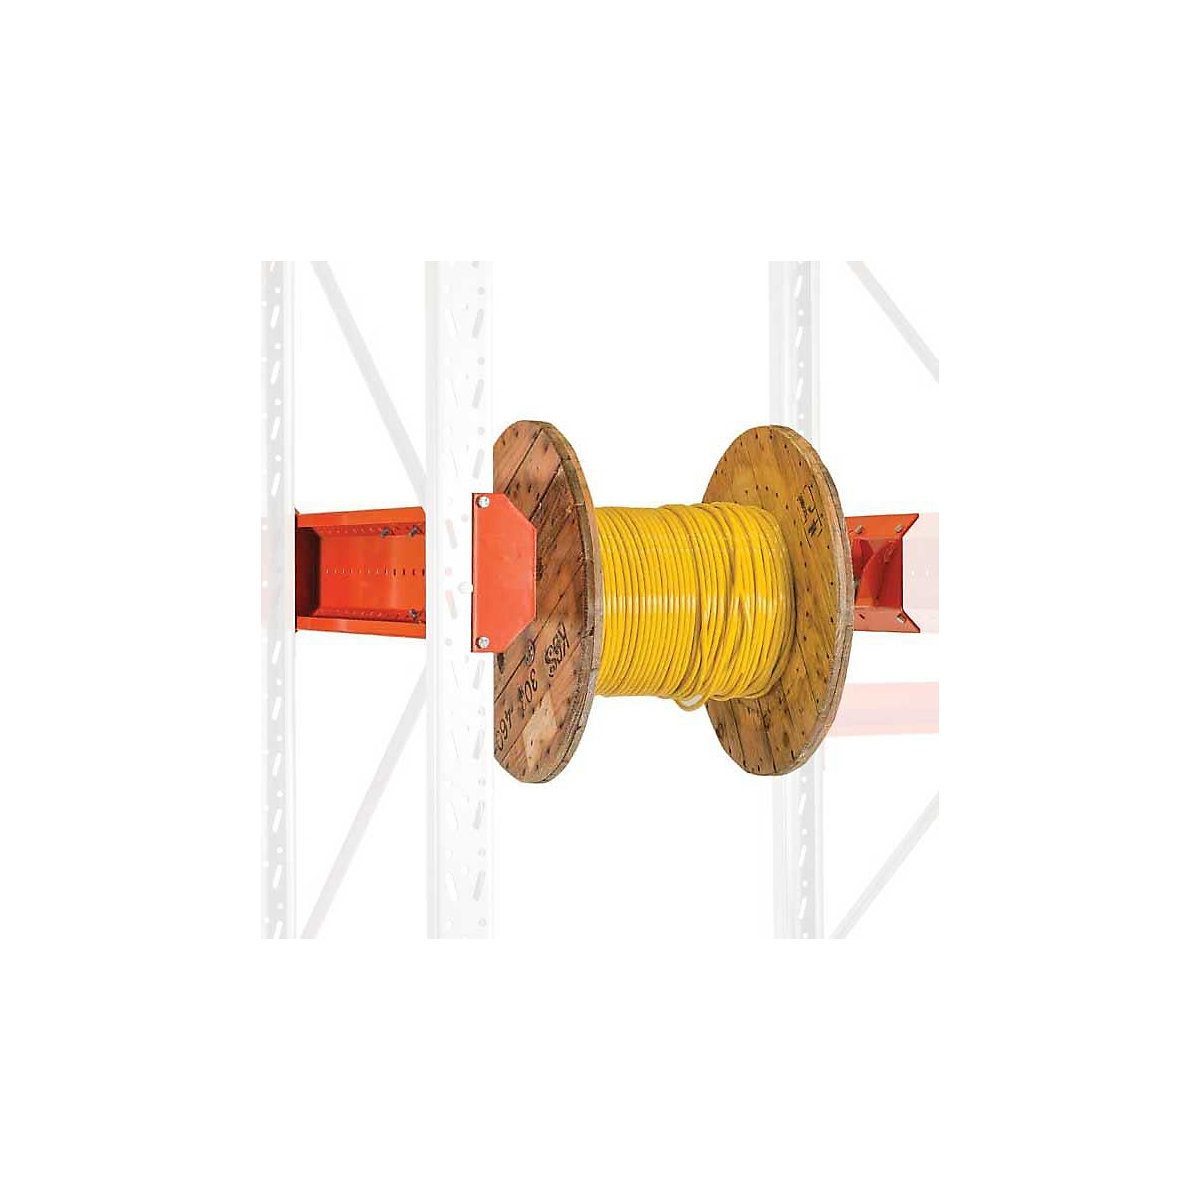 Cable reel system for pallet racking sites